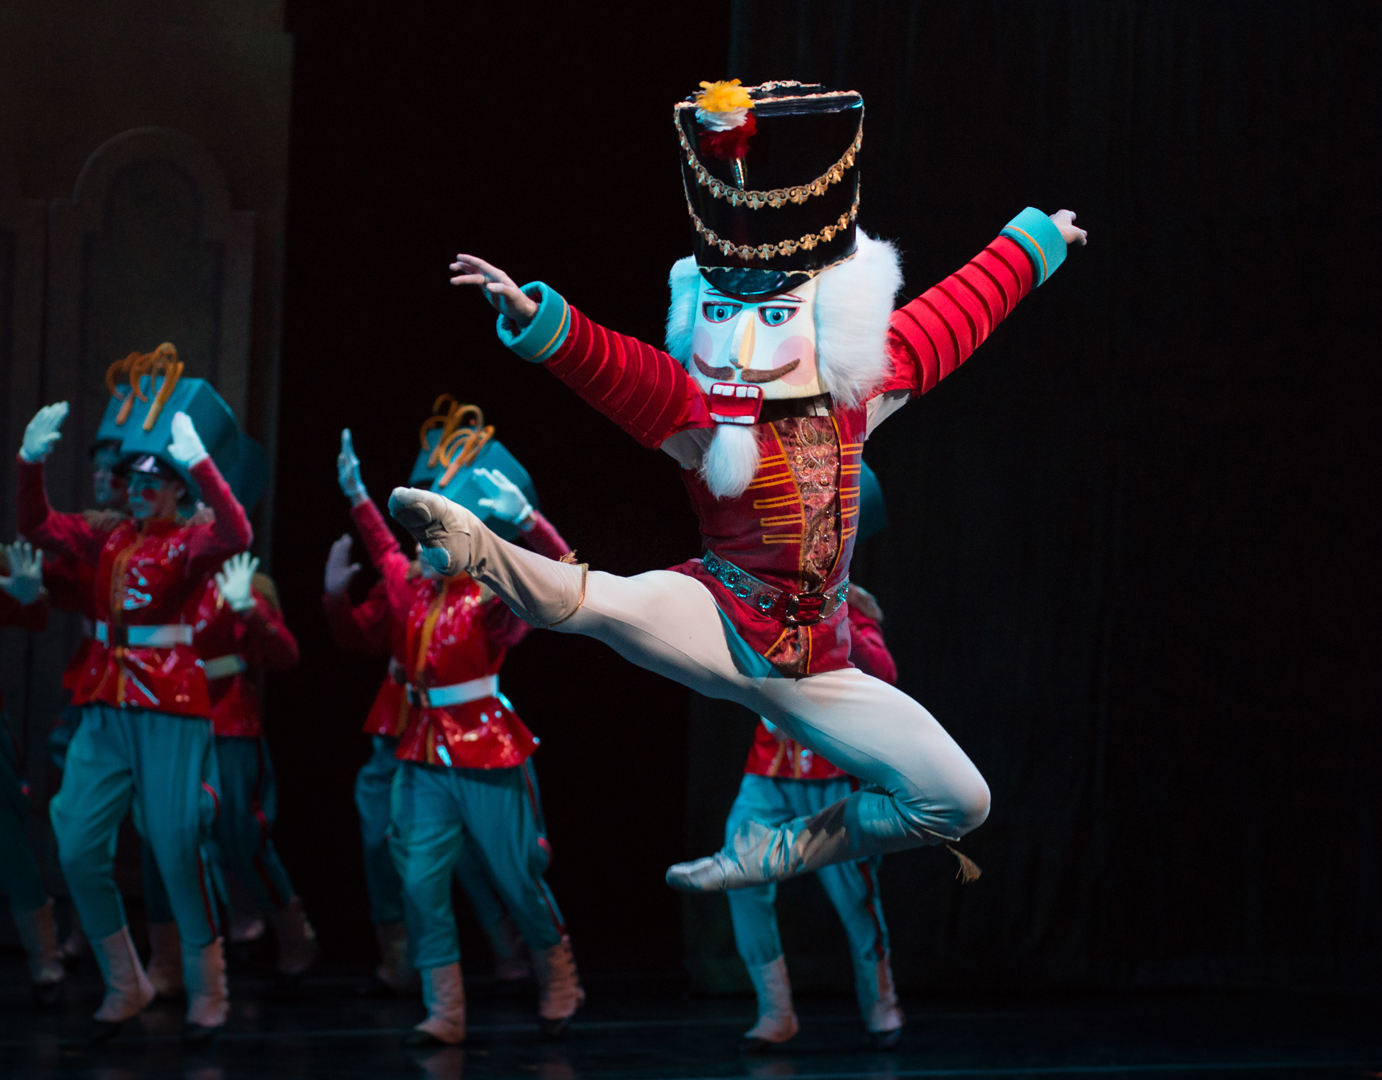 Only Actual Geniuses Have Scored Over 15/20 on This Trivia Test. Will You? The Nutcracker ballet